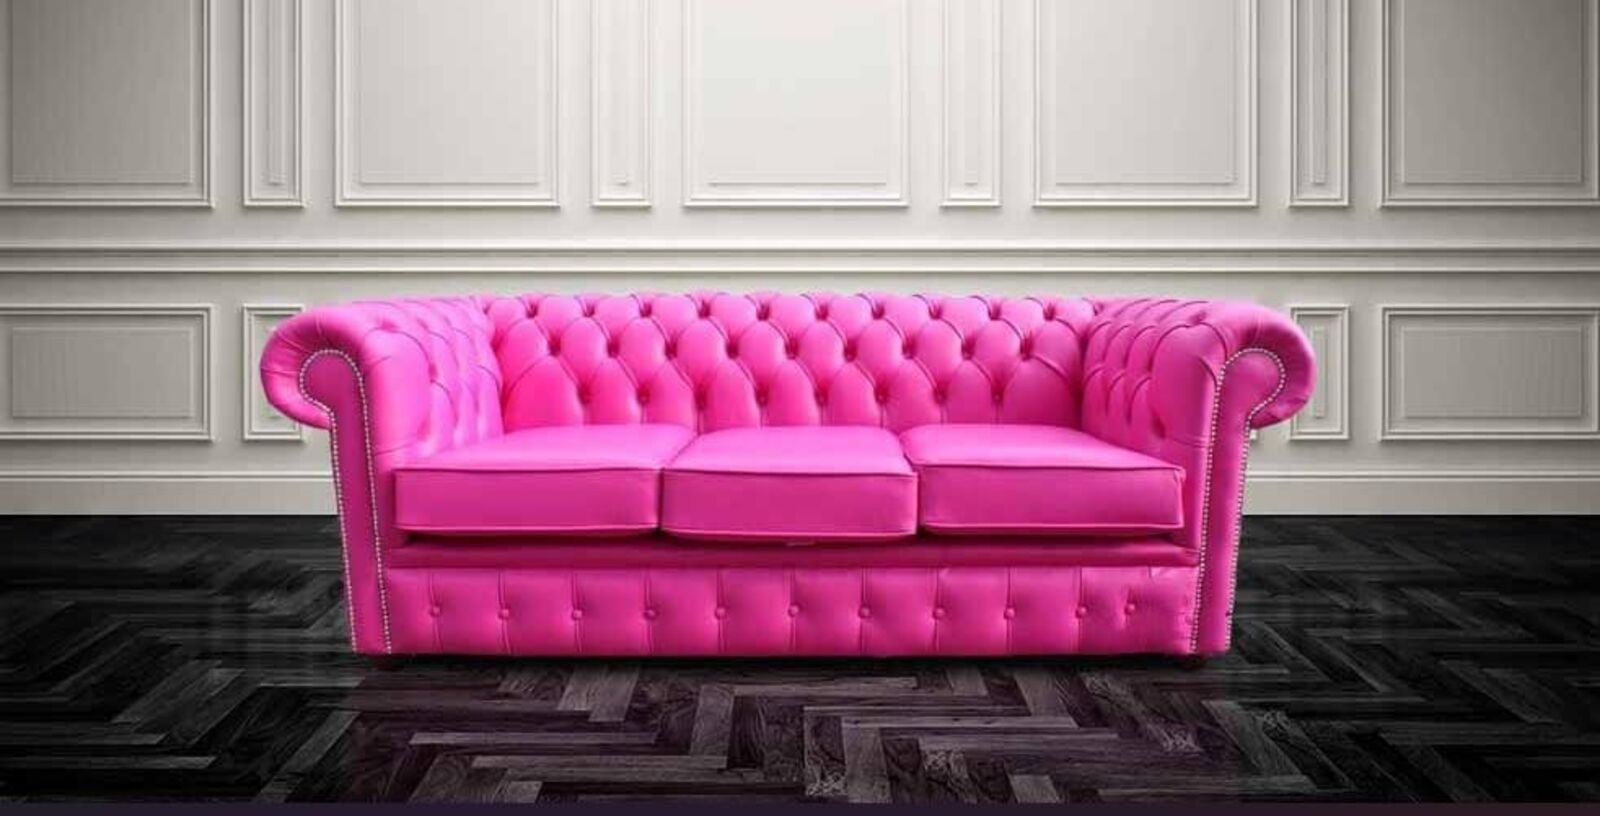 Product photograph of Chesterfield 3 Seater Sofa Settee Fuchsia Pink Leather Sofa Offer from Designer Sofas 4U